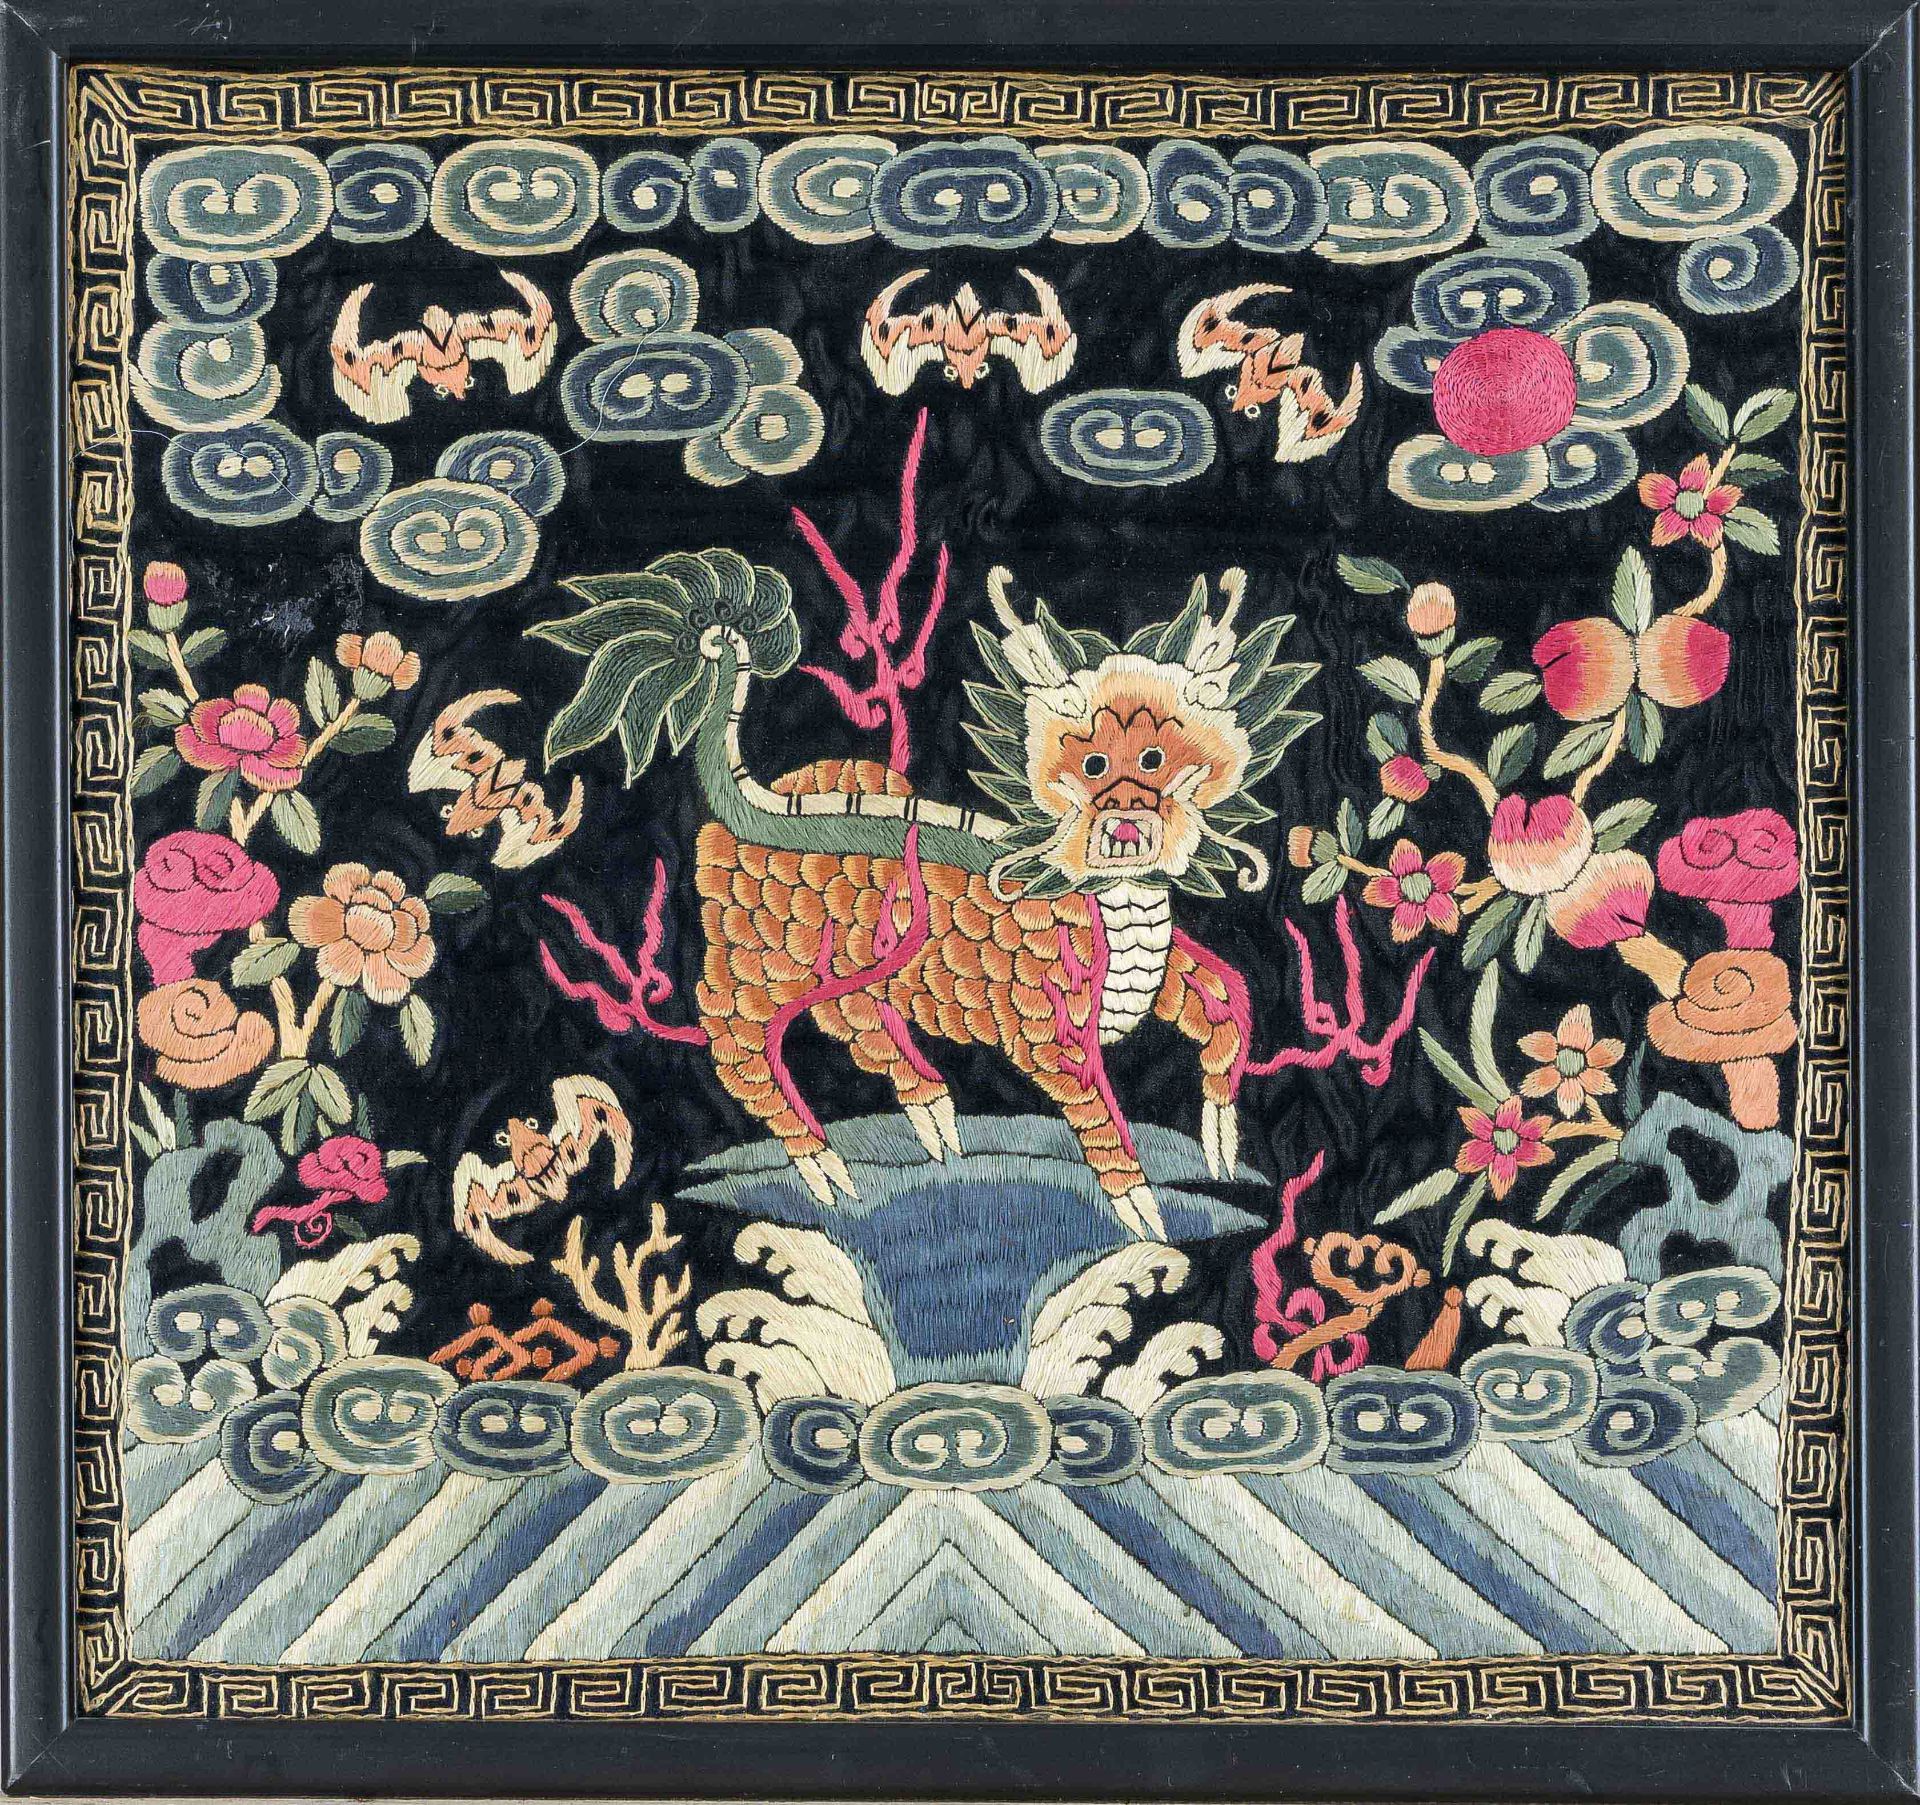 Silk embroidery, China late Qing, Qilin surrounded by stylized bands of clouds, bats and flowers.